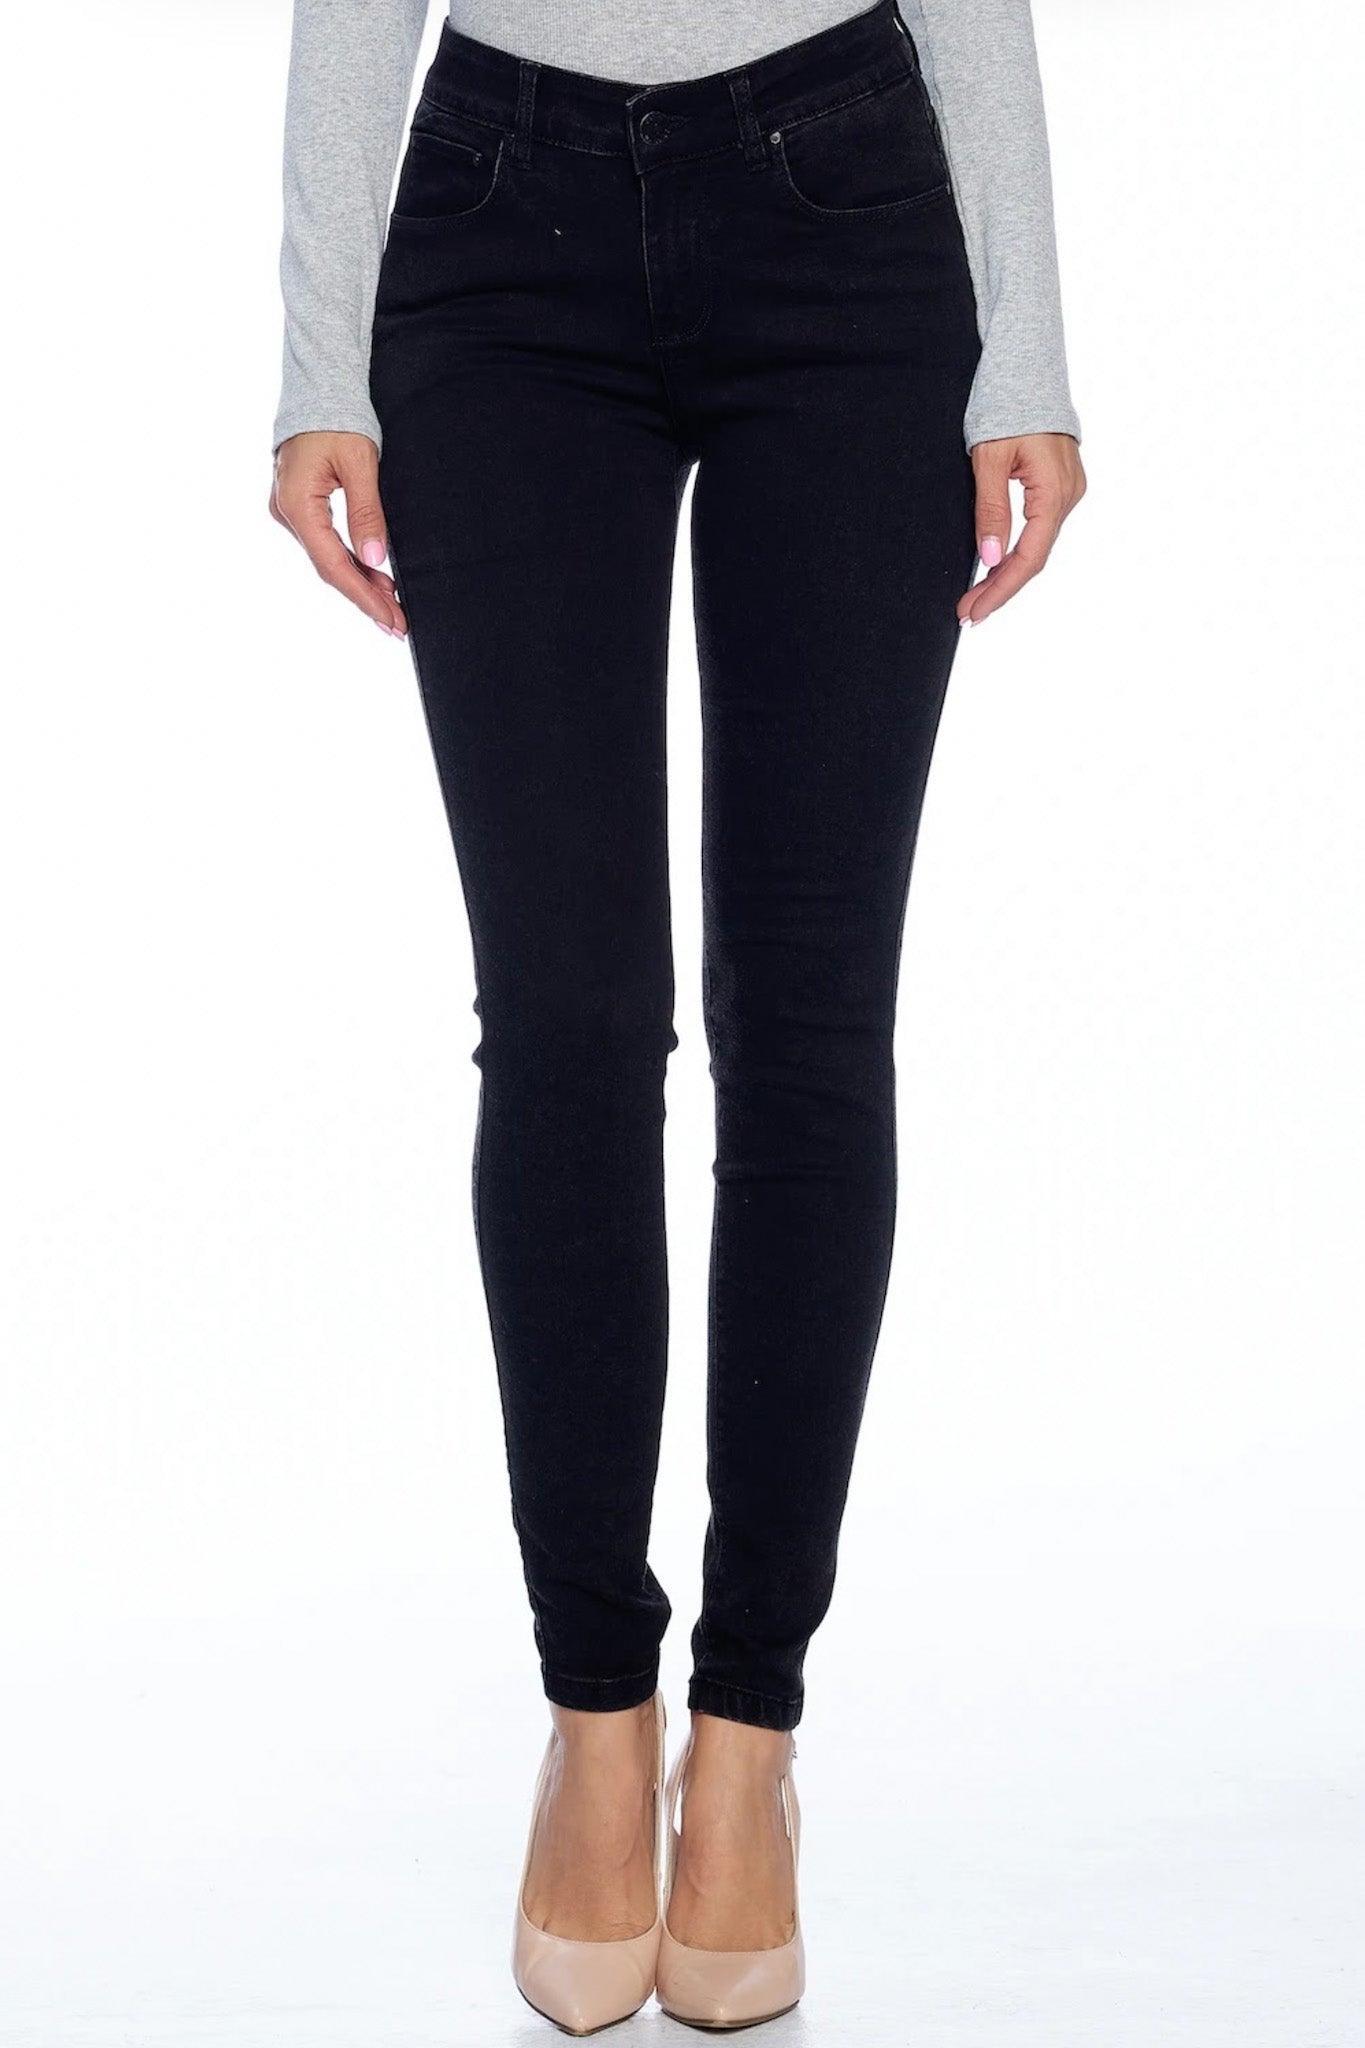 Blue Age Solid Black Jeans - SteelBlue